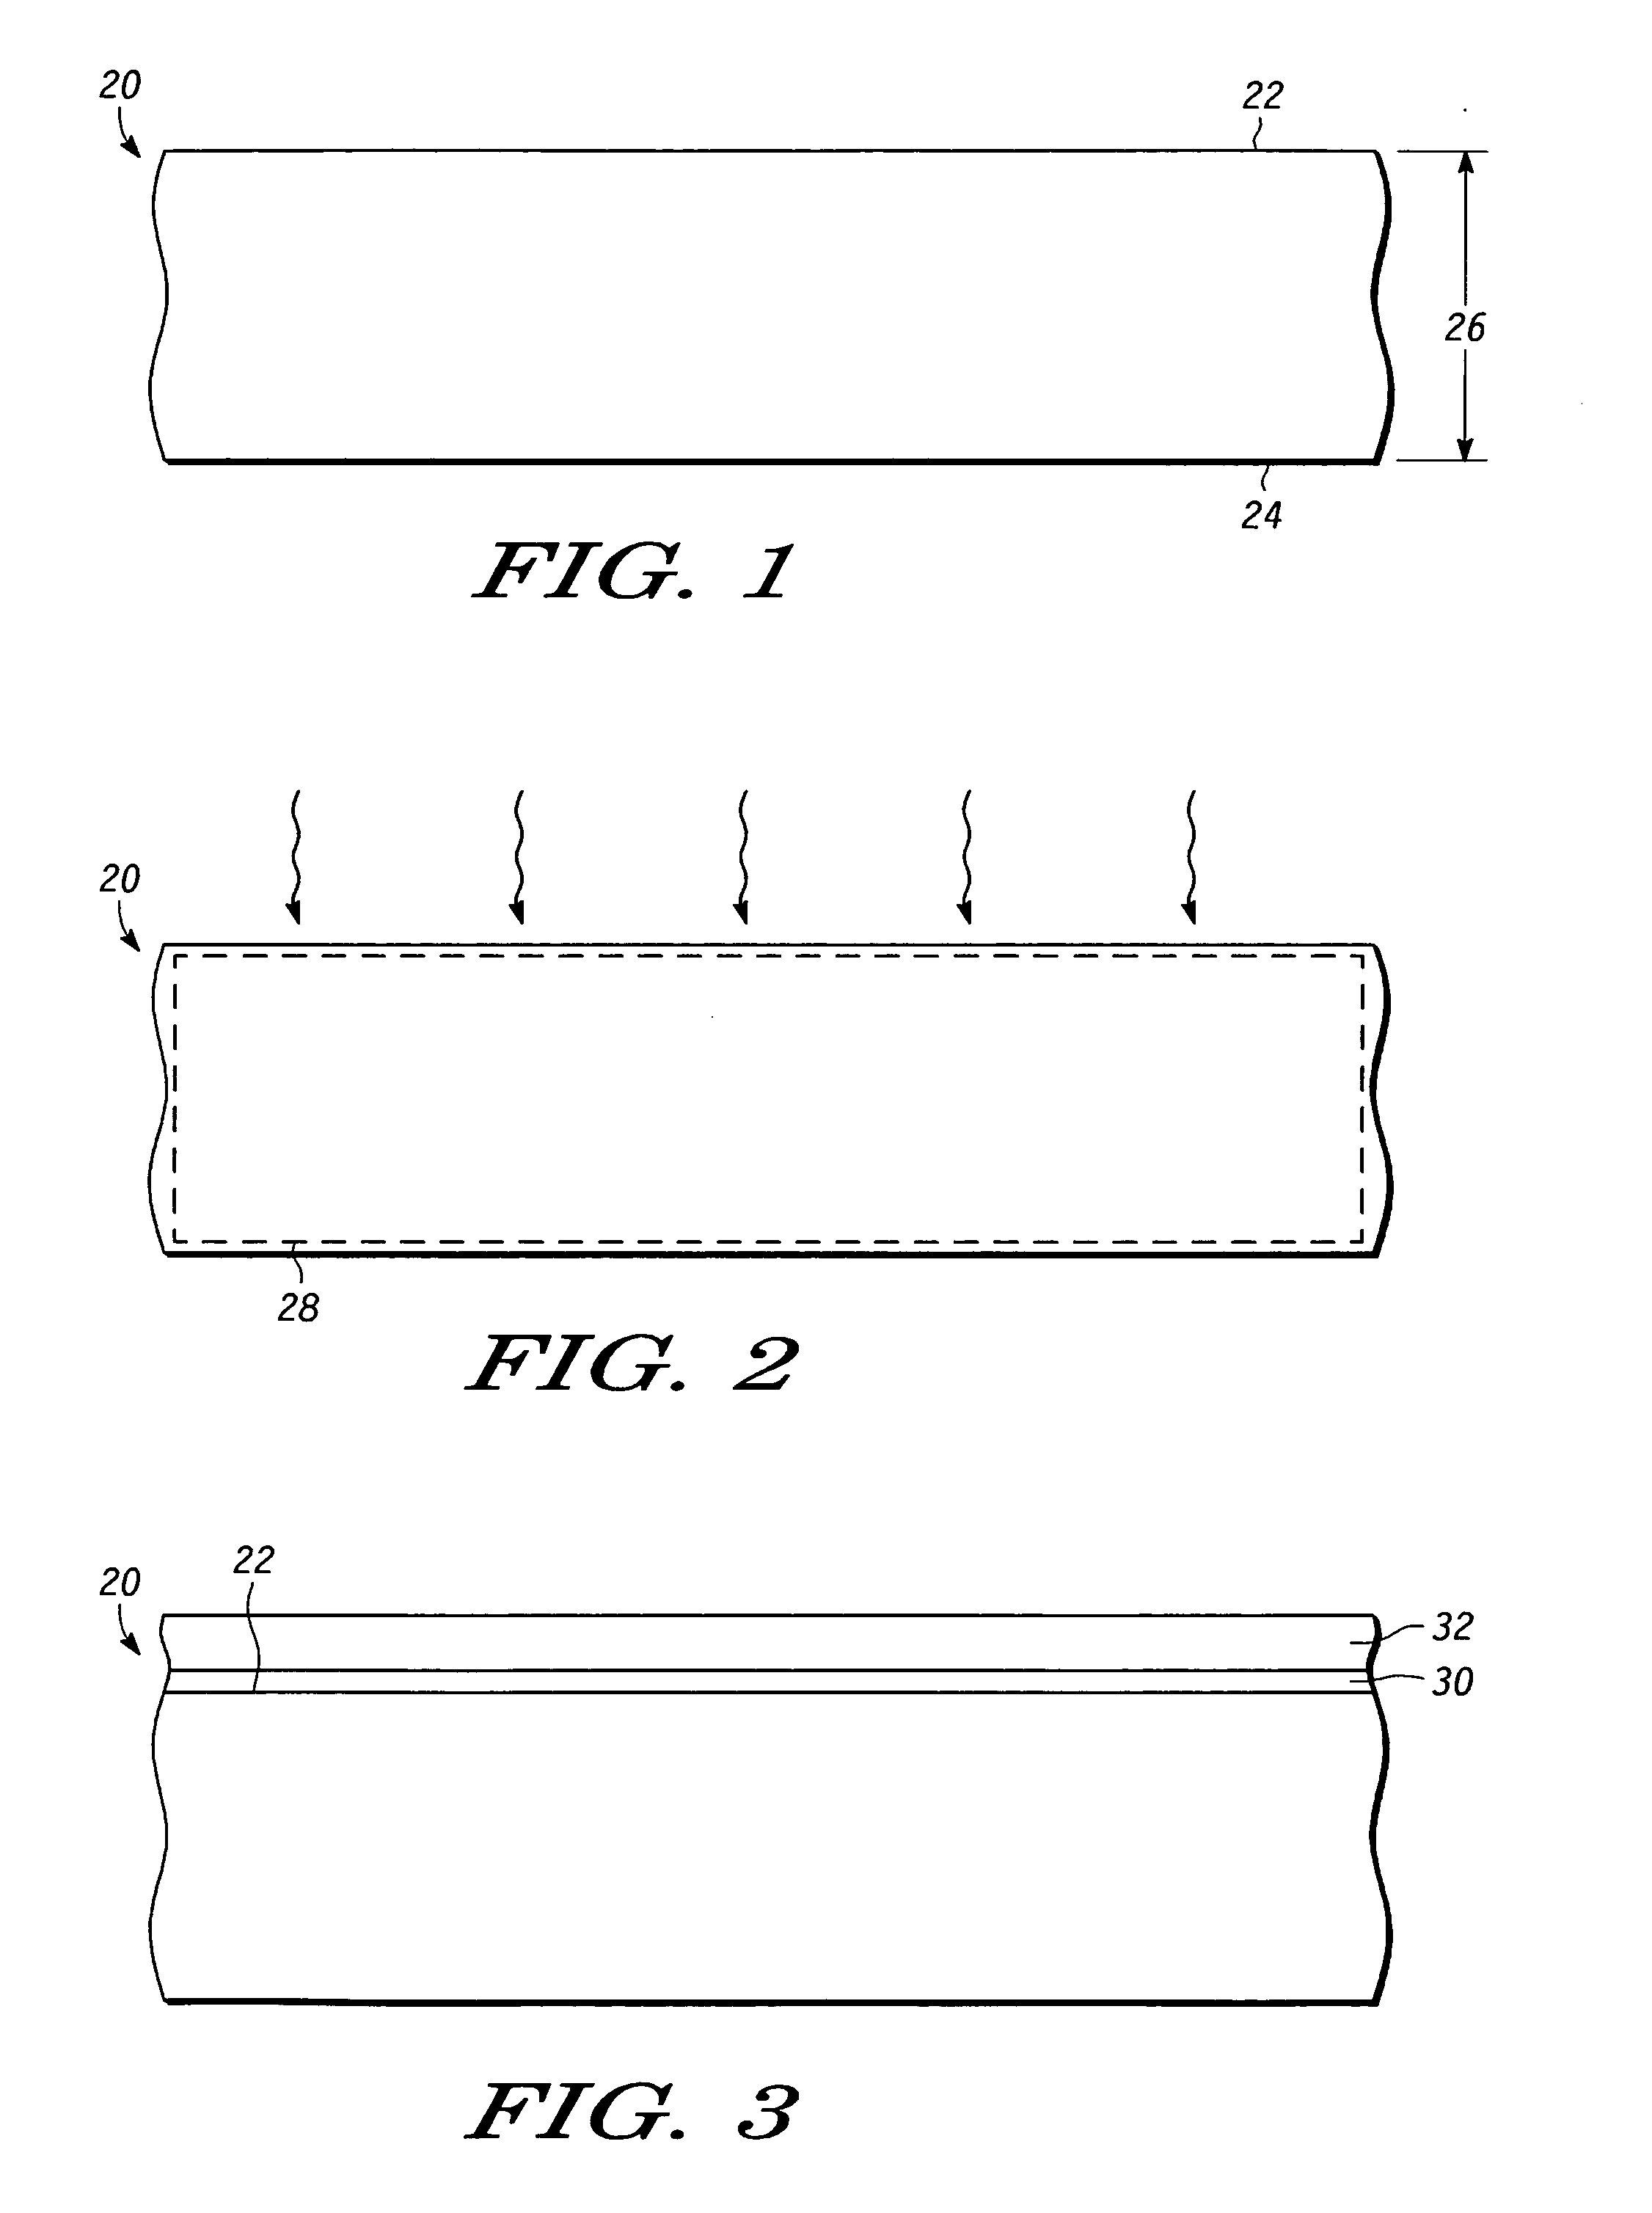 Multi-gate semiconductor device and method for forming the same